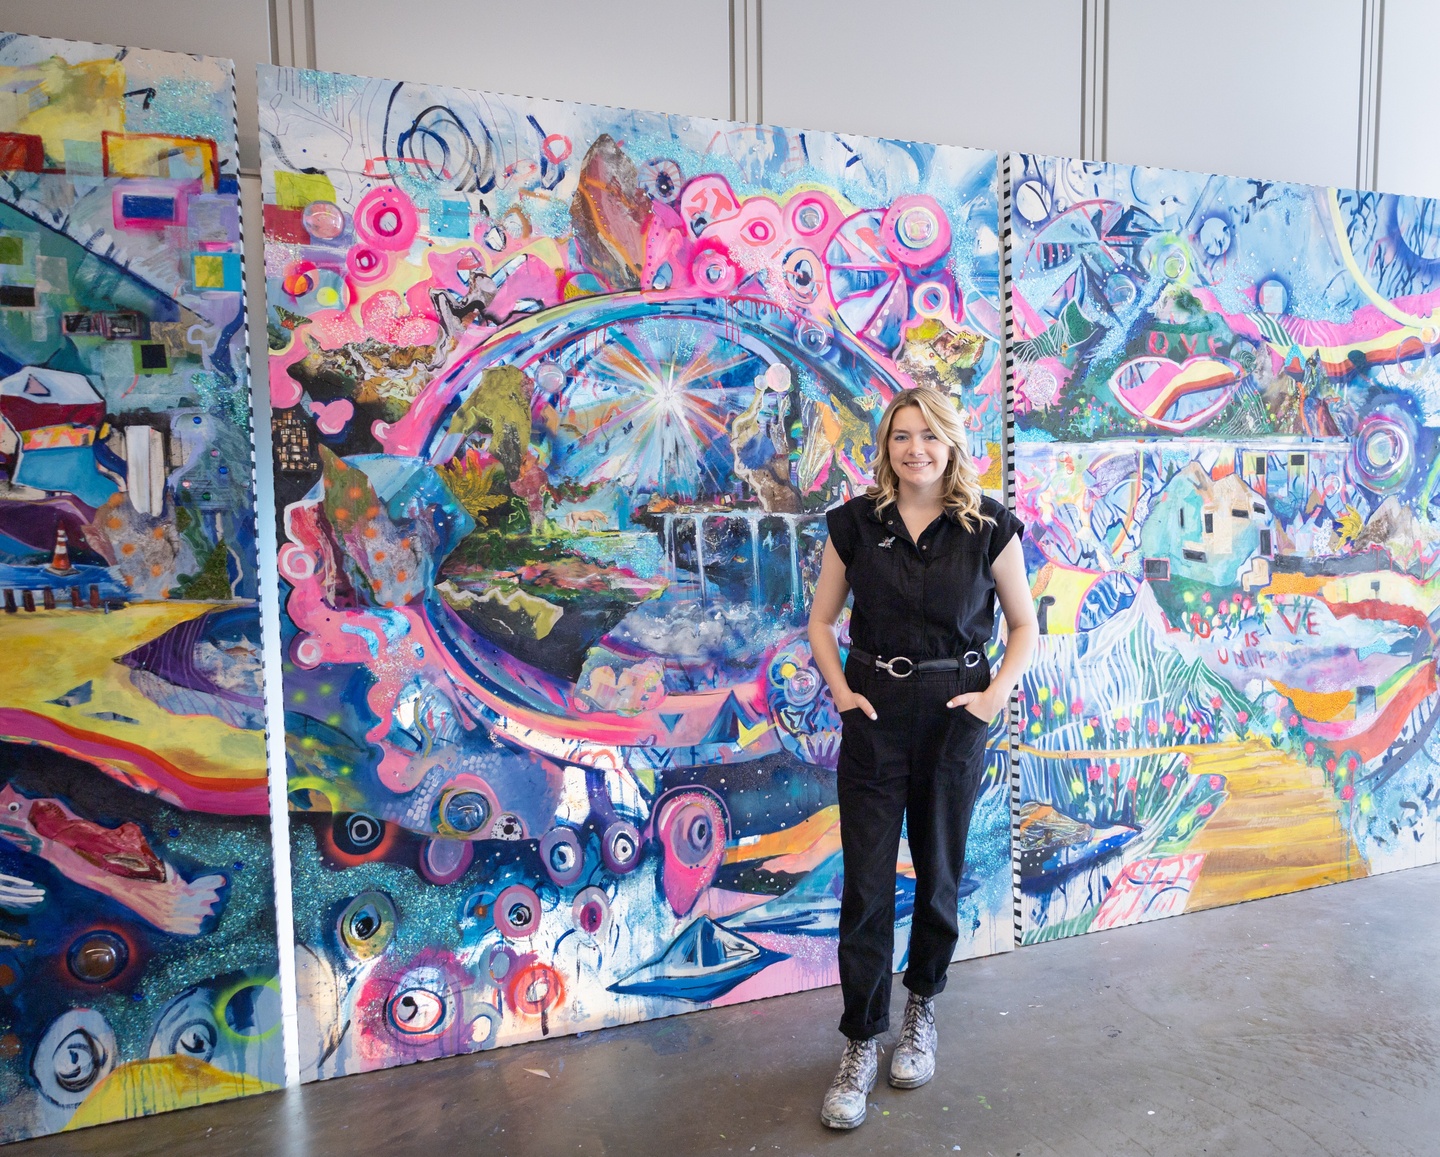 woman with long blonde hair wearing black standing in front of 3 paintings taller than her